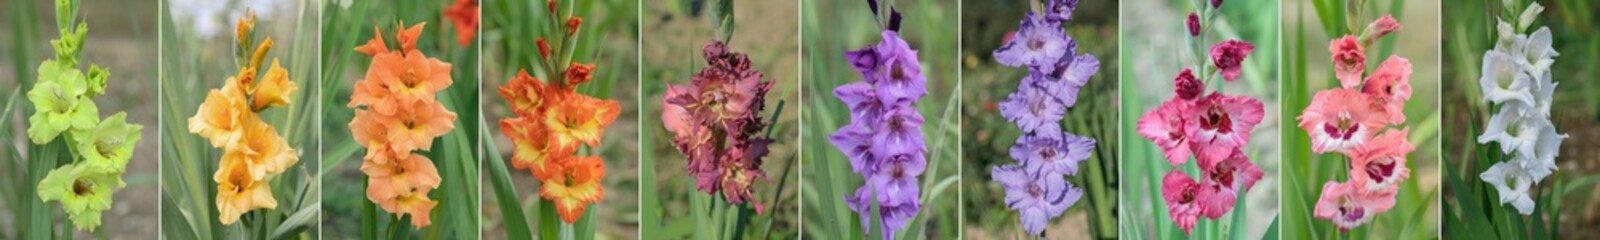 Collage of ten colorful gladiolus blossoms. Focus in the middle of the blossoms